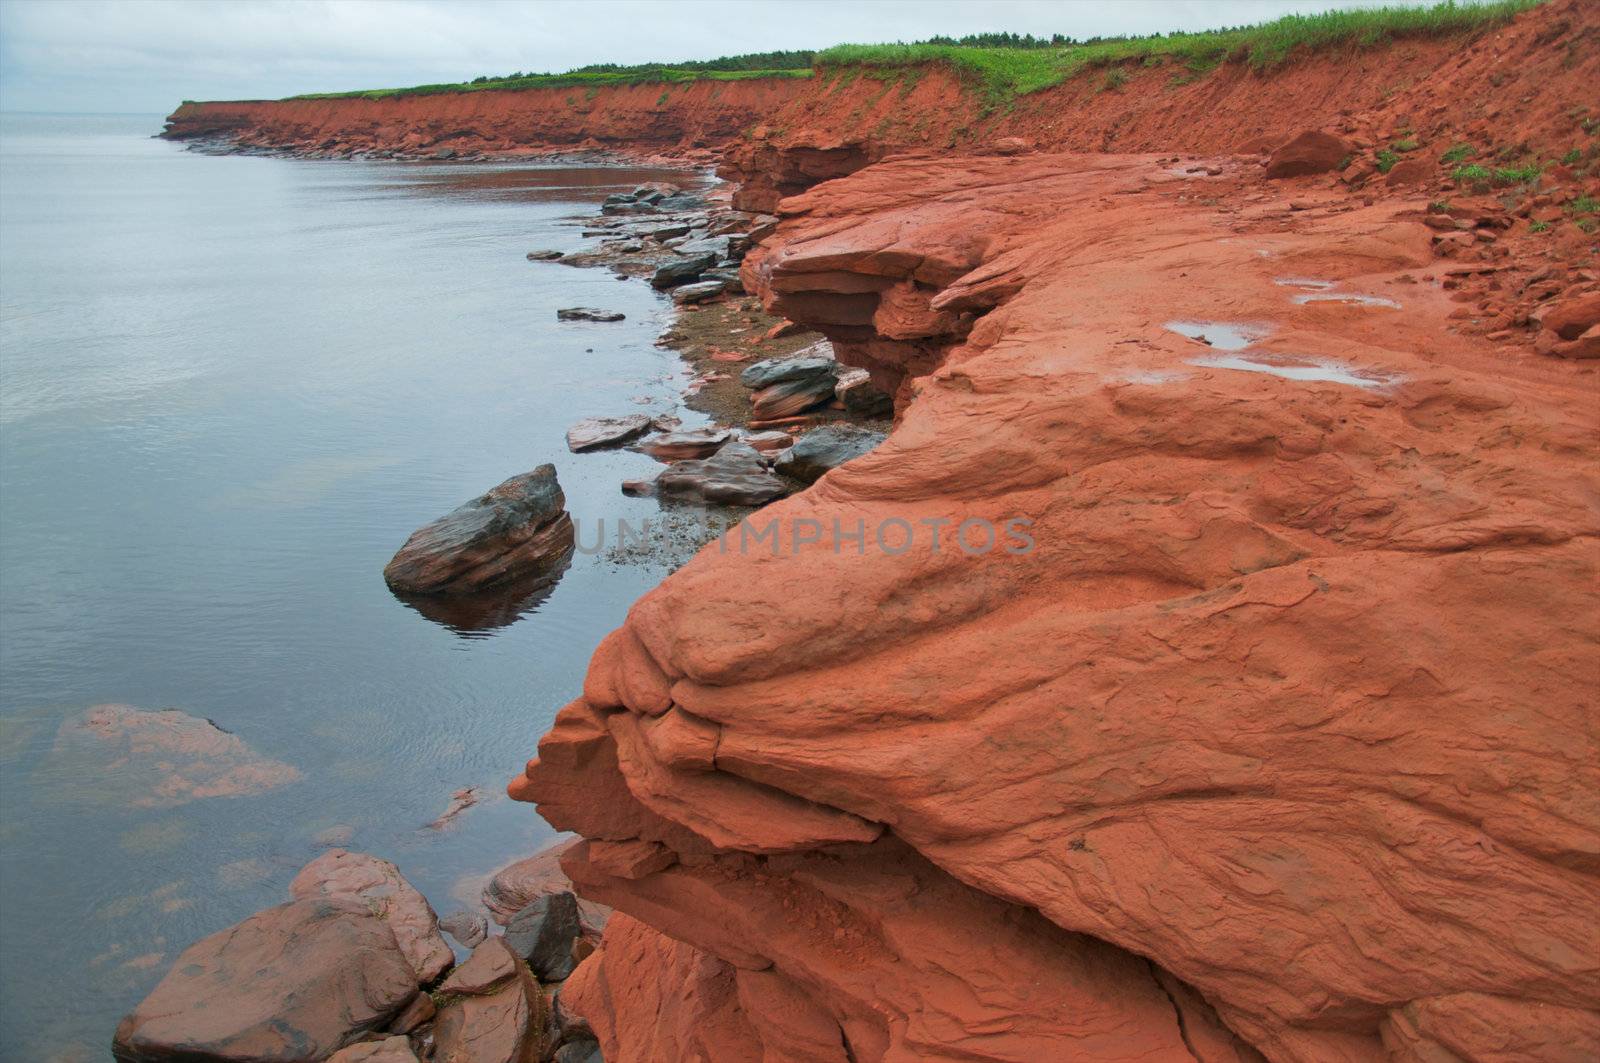 These red cliffs edge the Gulf of St. Lawrence near Cavendish, PEI, Canada.